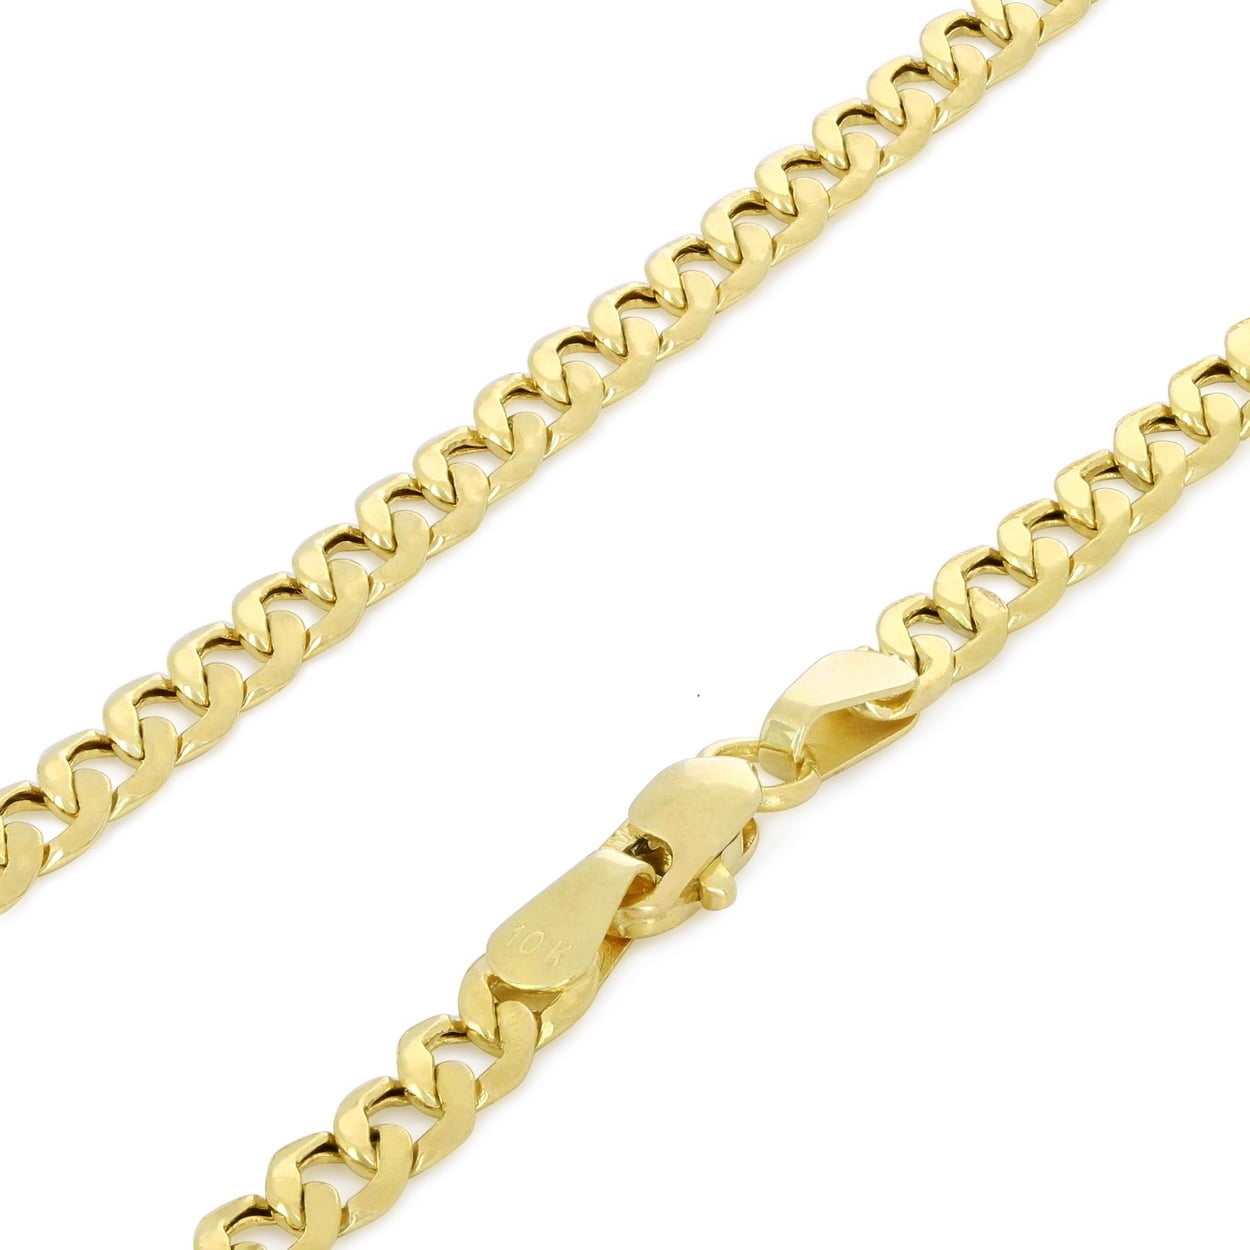 Sonia Jewels 14k White and Yellow Gold Two Tone Curb Concave White Pave Chain Necklace With Lobster Claw Clasp